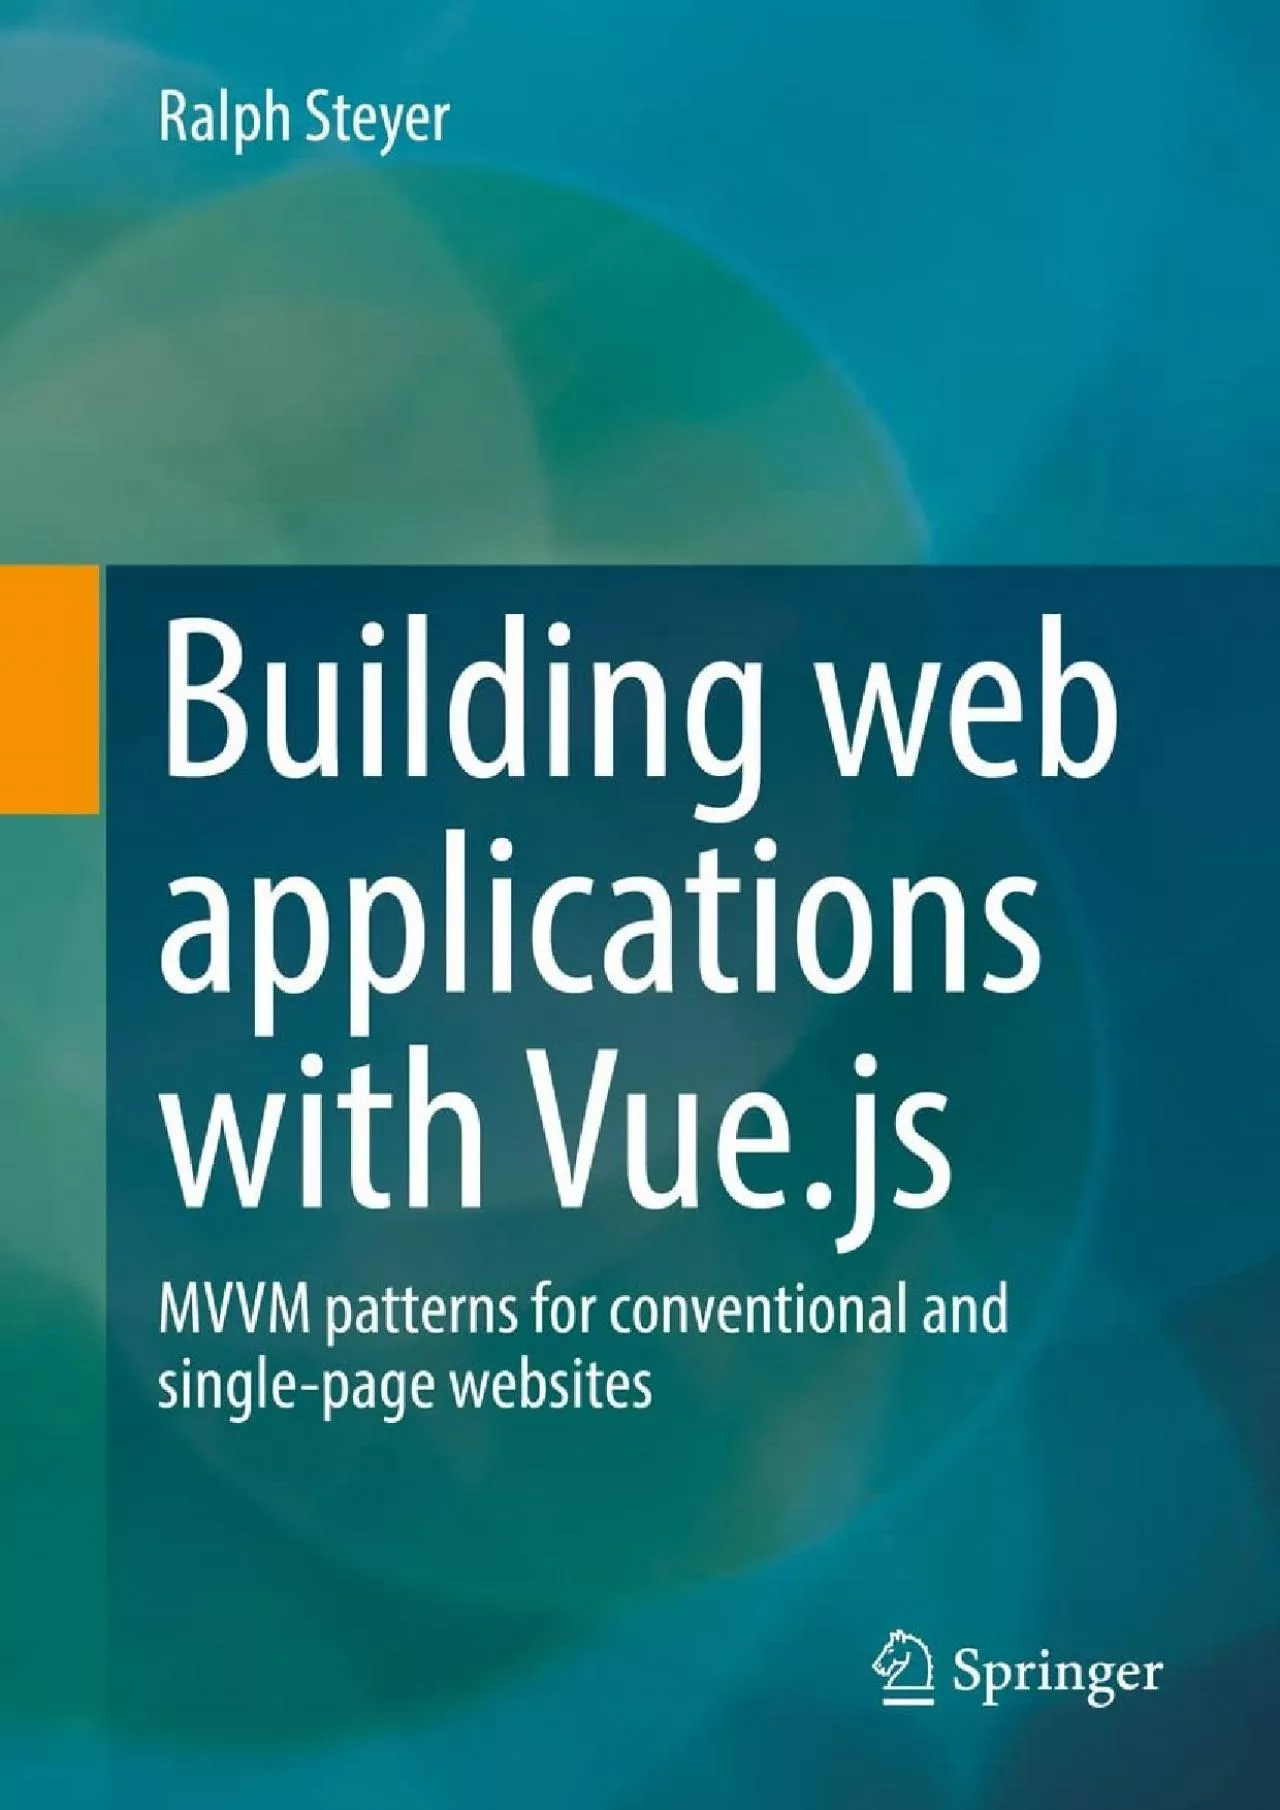 [eBOOK]-Building web applications with Vue.js: MVVM patterns for conventional and single-page